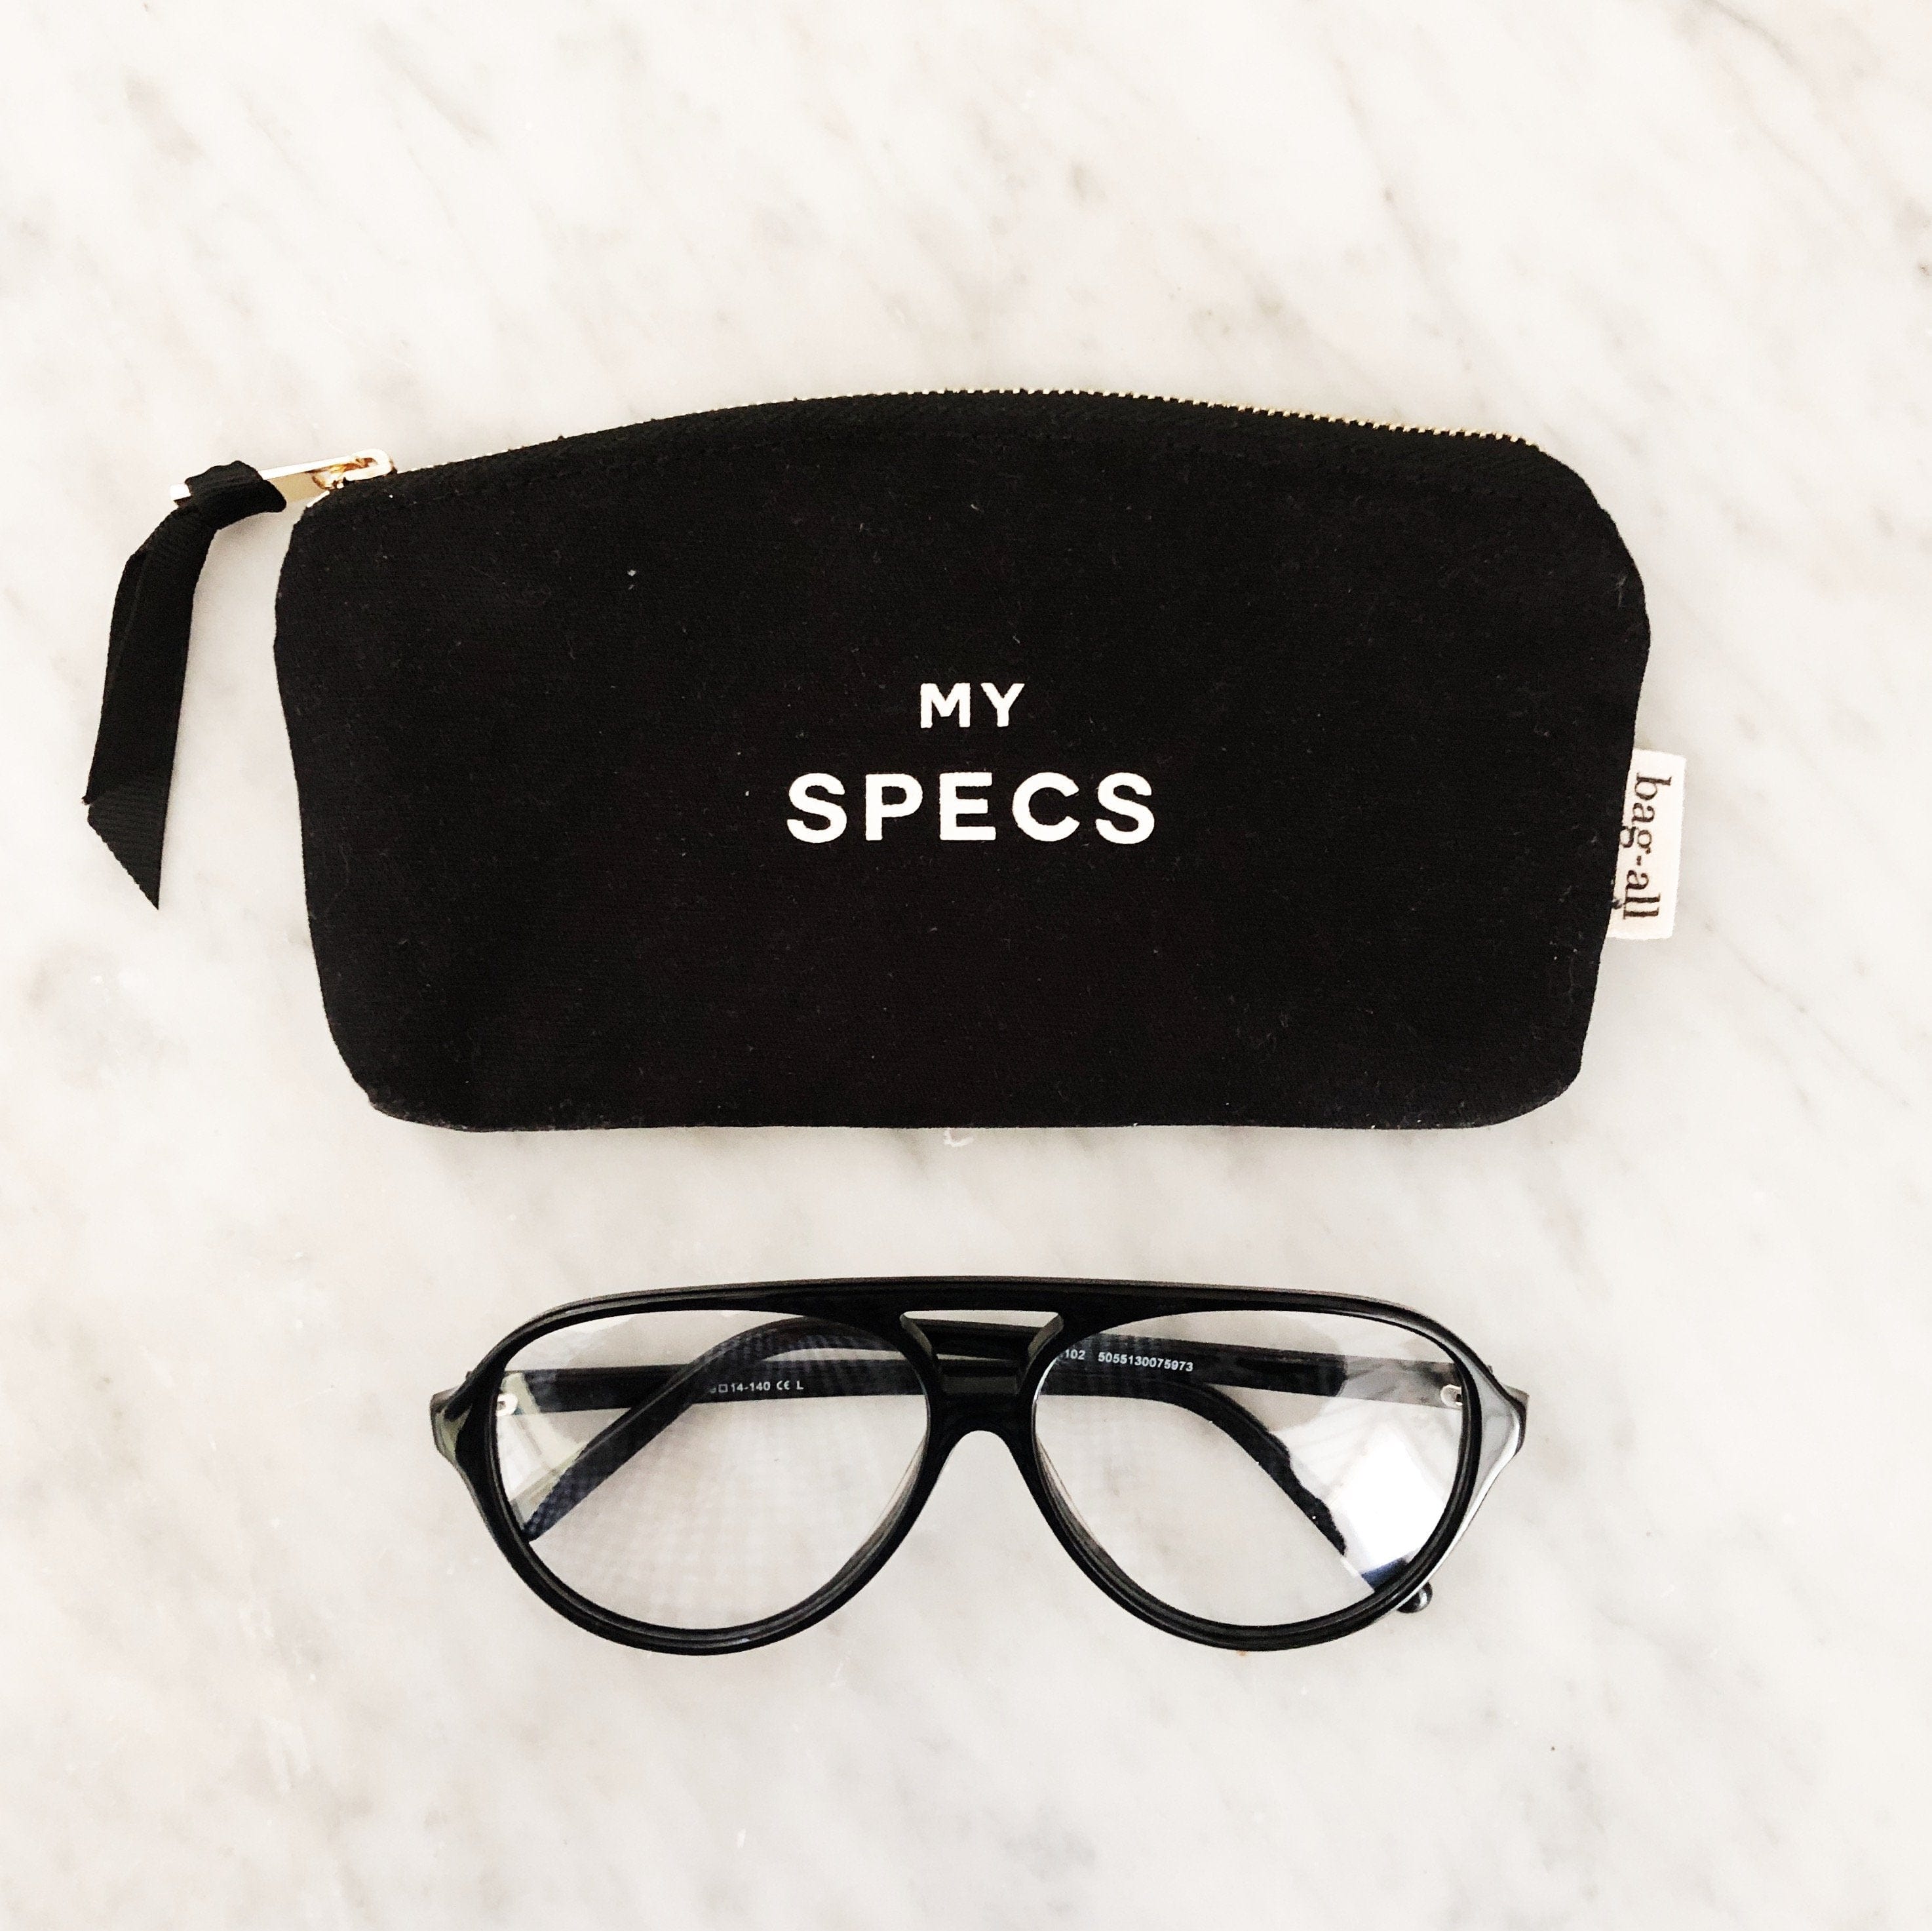 Specs Black Glasses Case "MY SPECS" printed on front, glasses